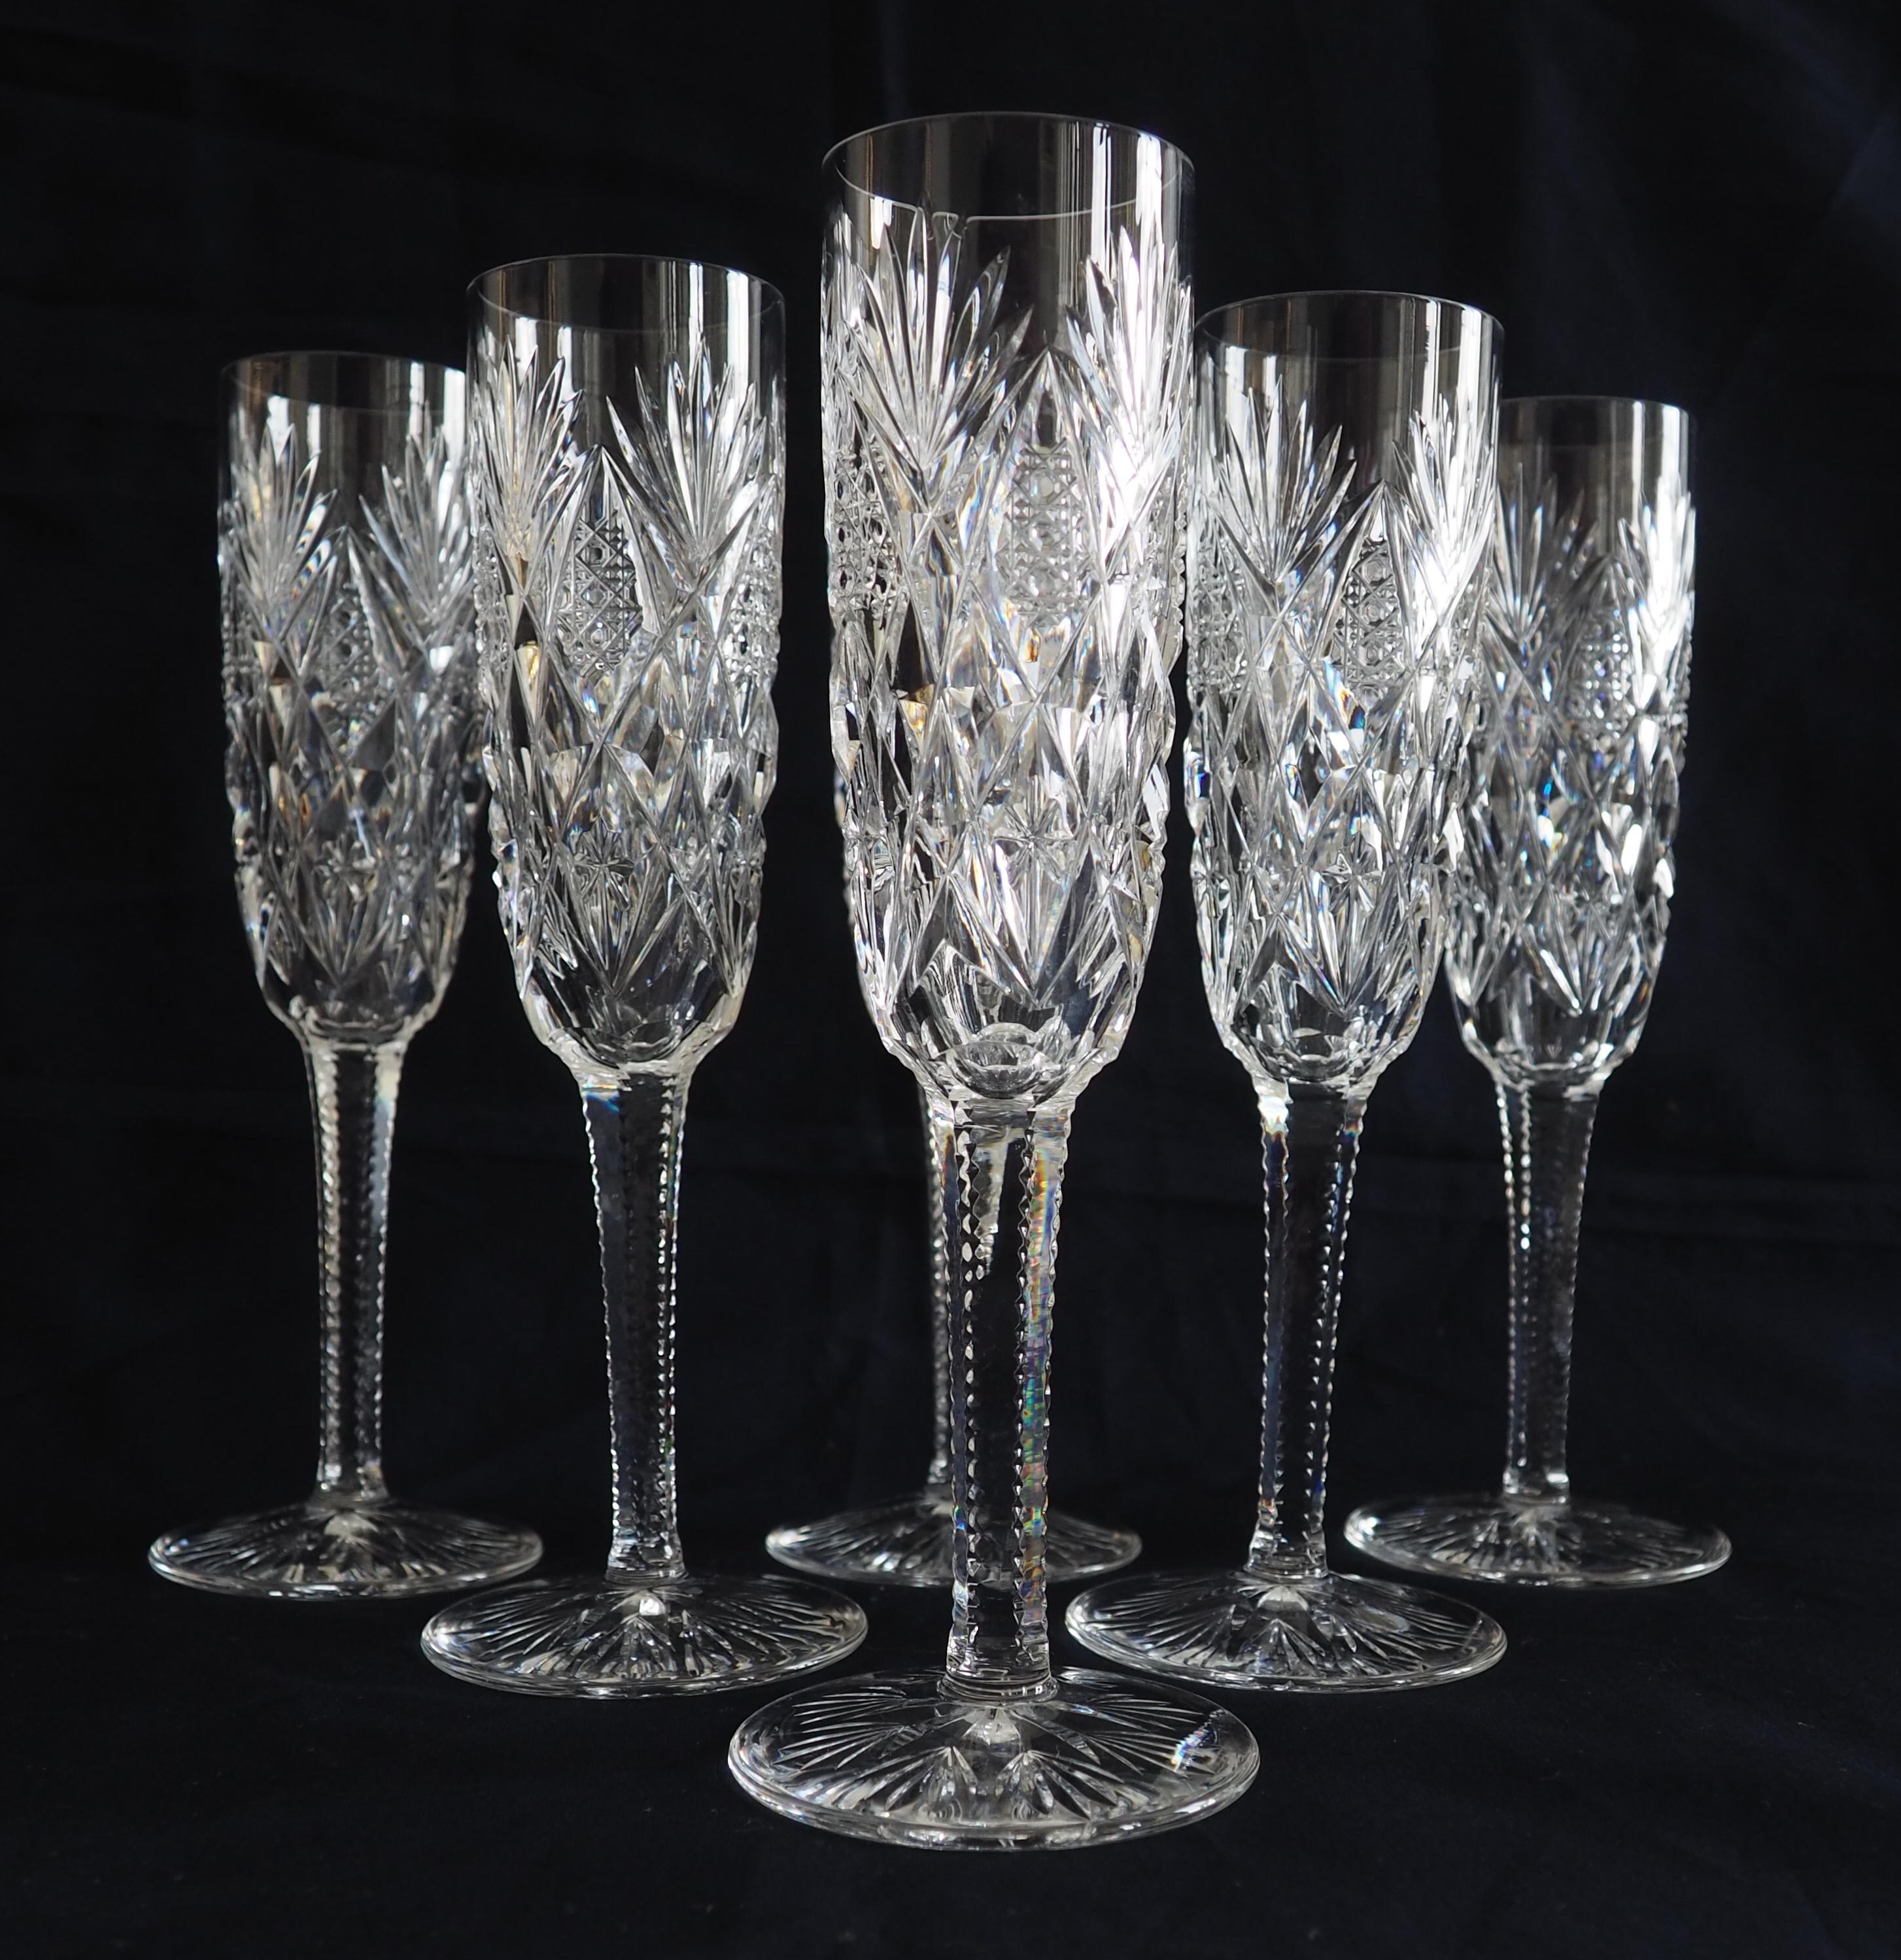 Modern Set of 24 St Louis crystal glasses (6*4), Florence pattern - signed - 6 guests